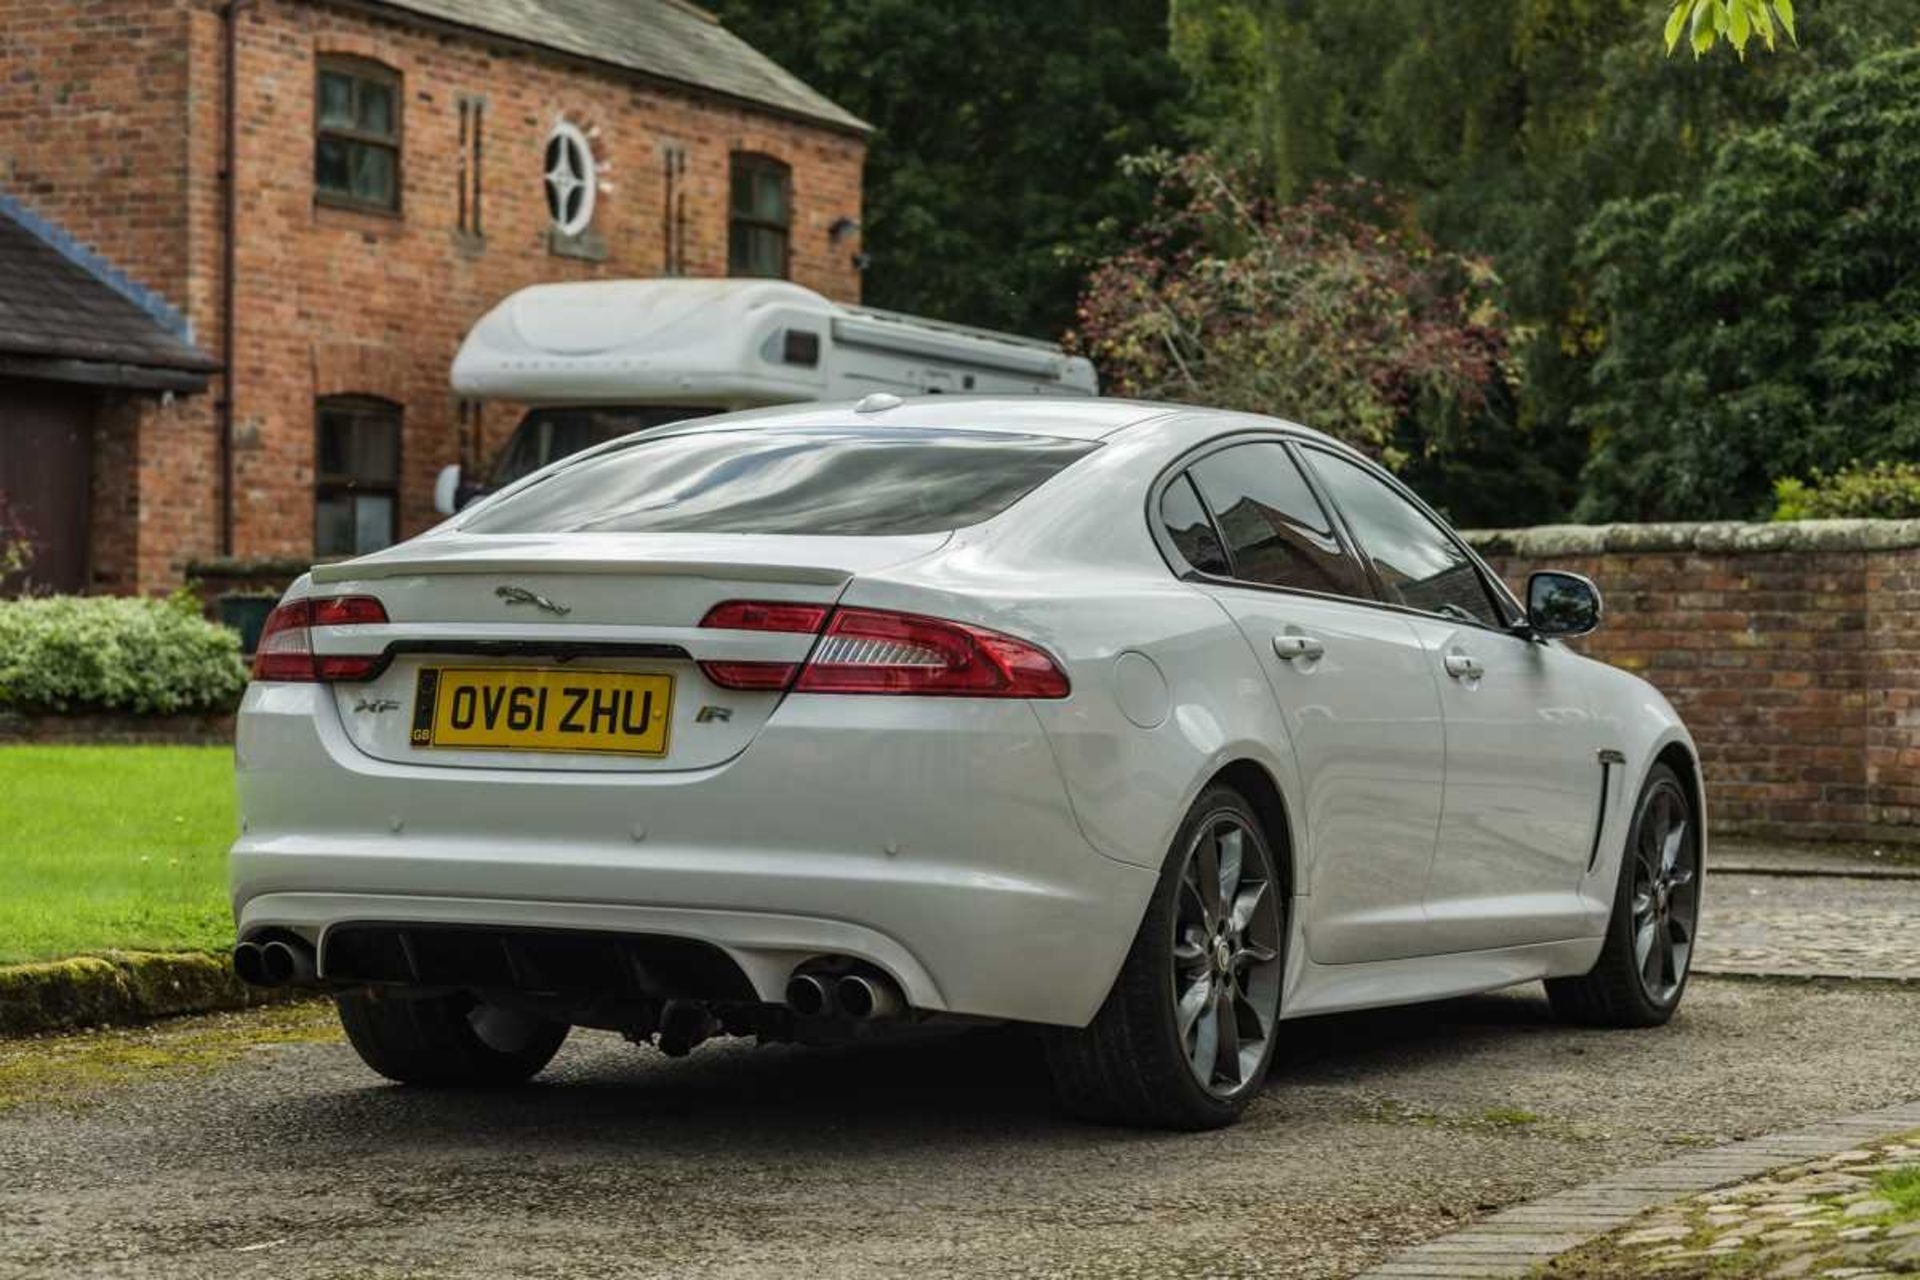 2011 Jaguar XFR Saloon 500 horsepower four-door super saloon, with an enviable factory specification - Image 11 of 83